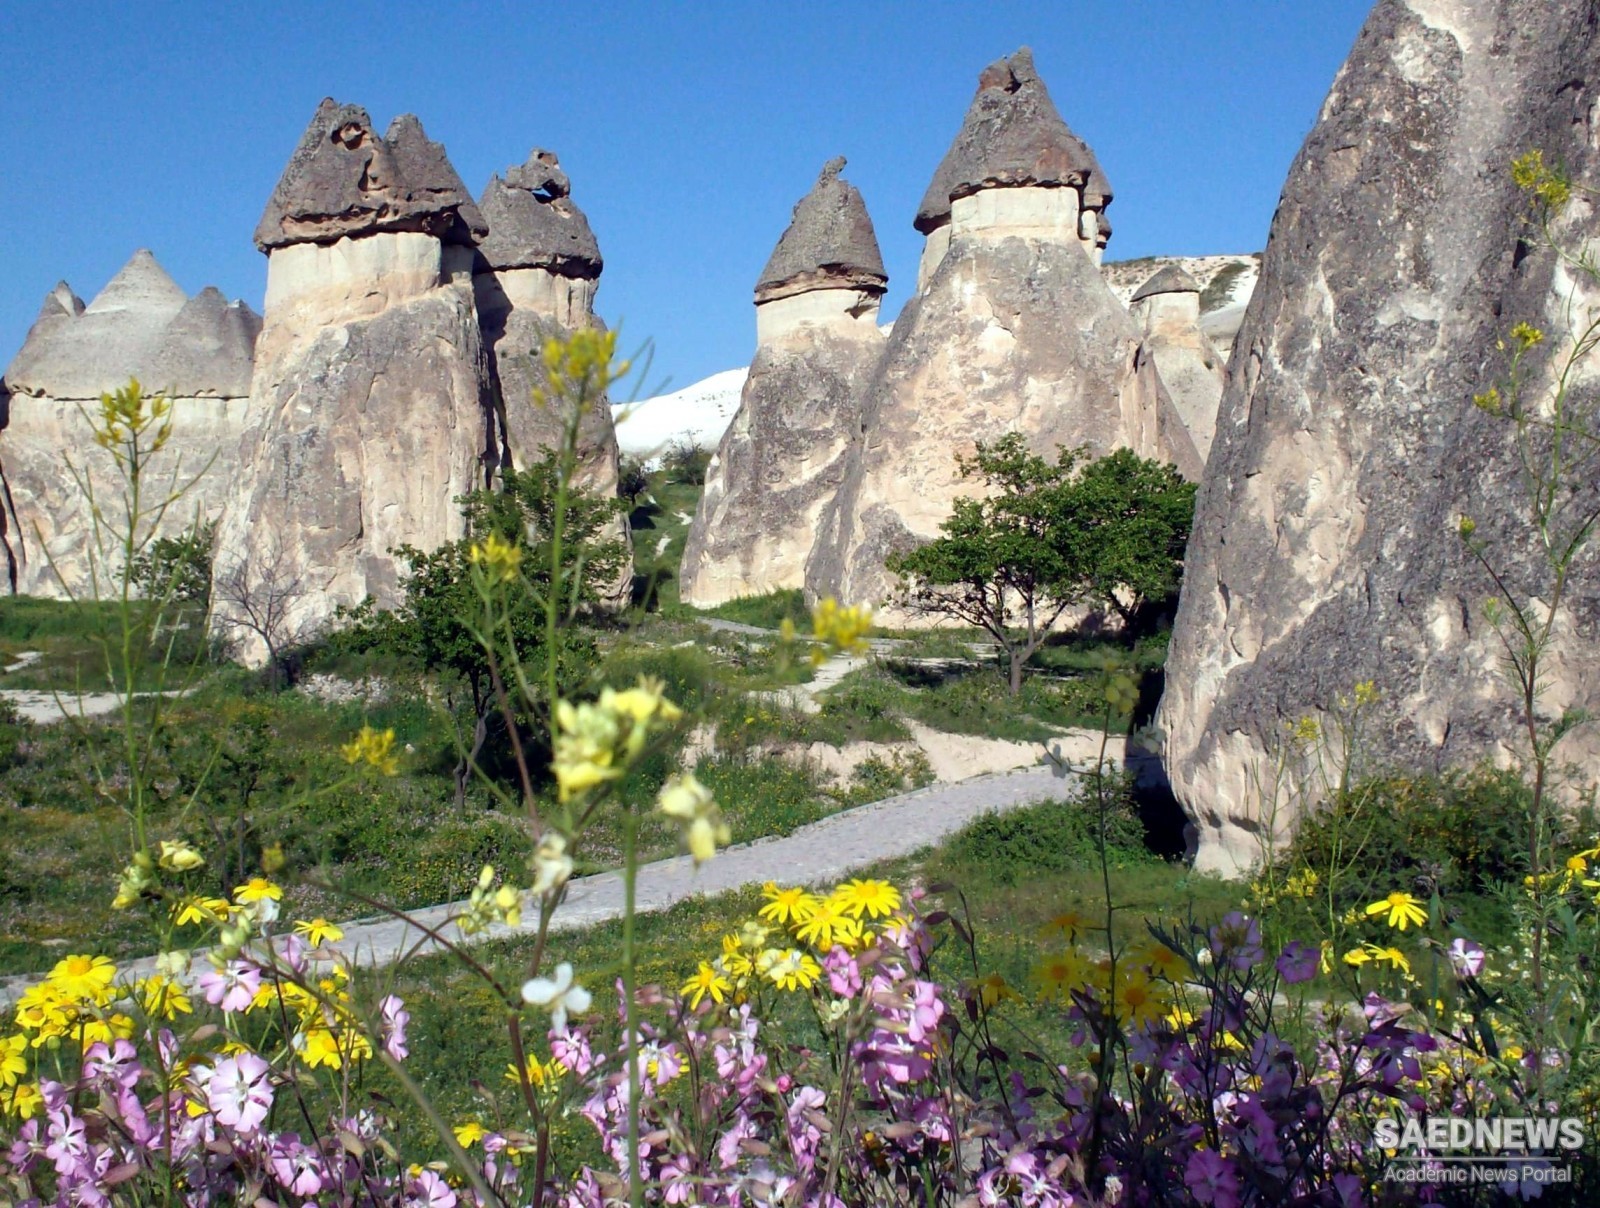 Göreme National Park and The Rock Sites of Cappodocia